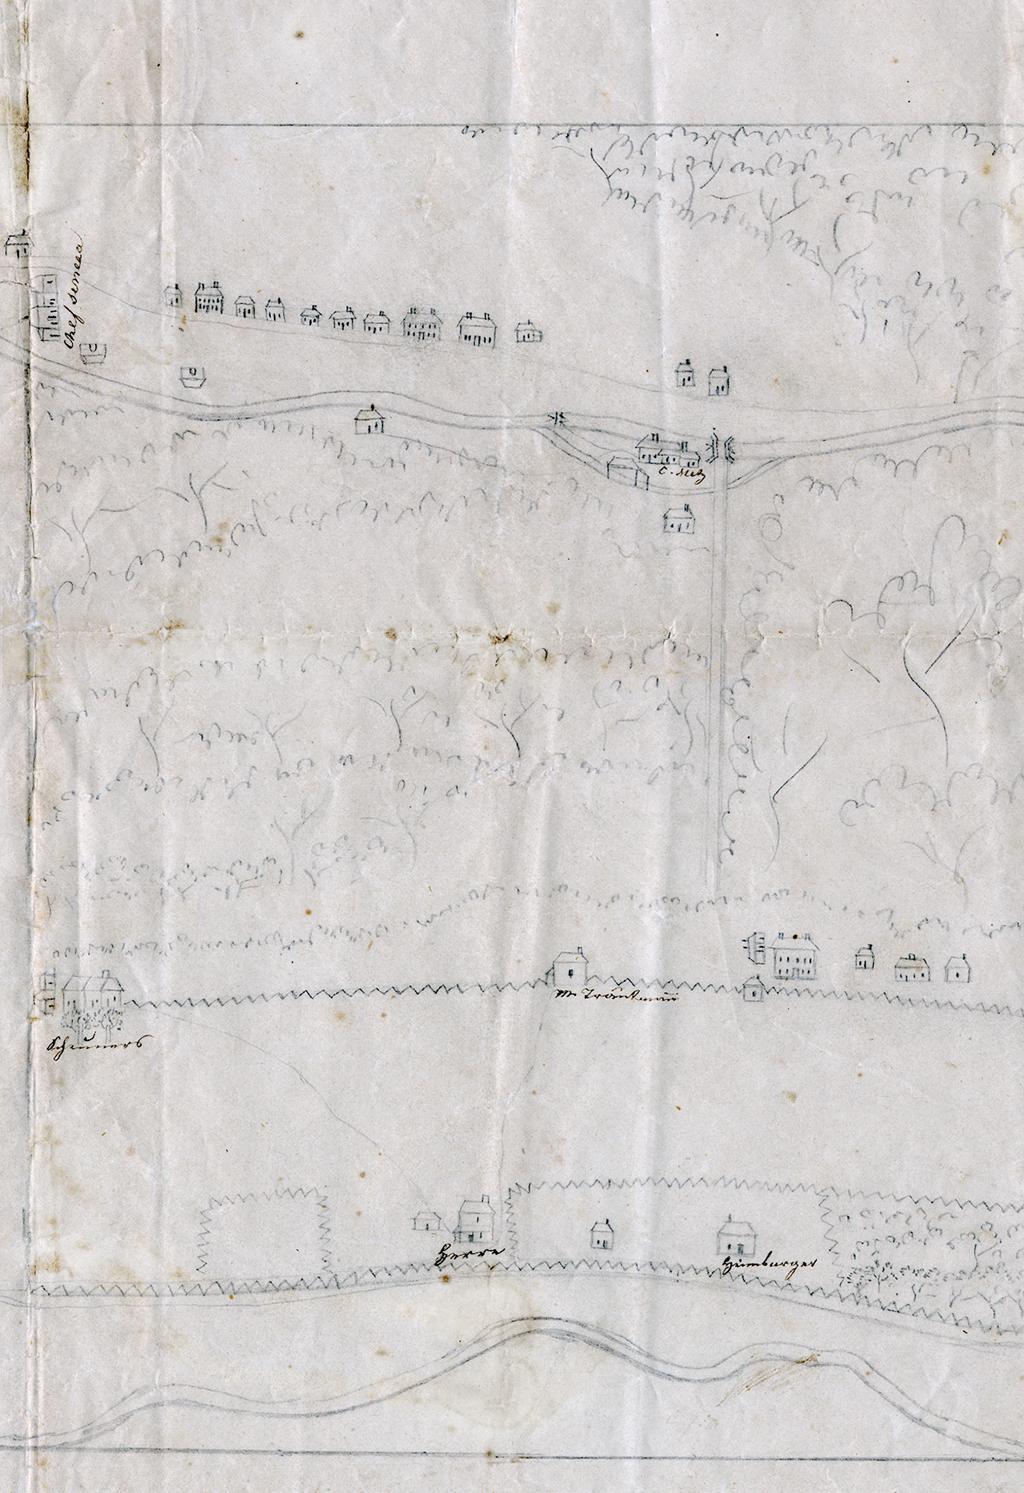 et al.: Hamilton College Library "Home Notes" This detail from Wilhelm Noé s 1844 map (no.